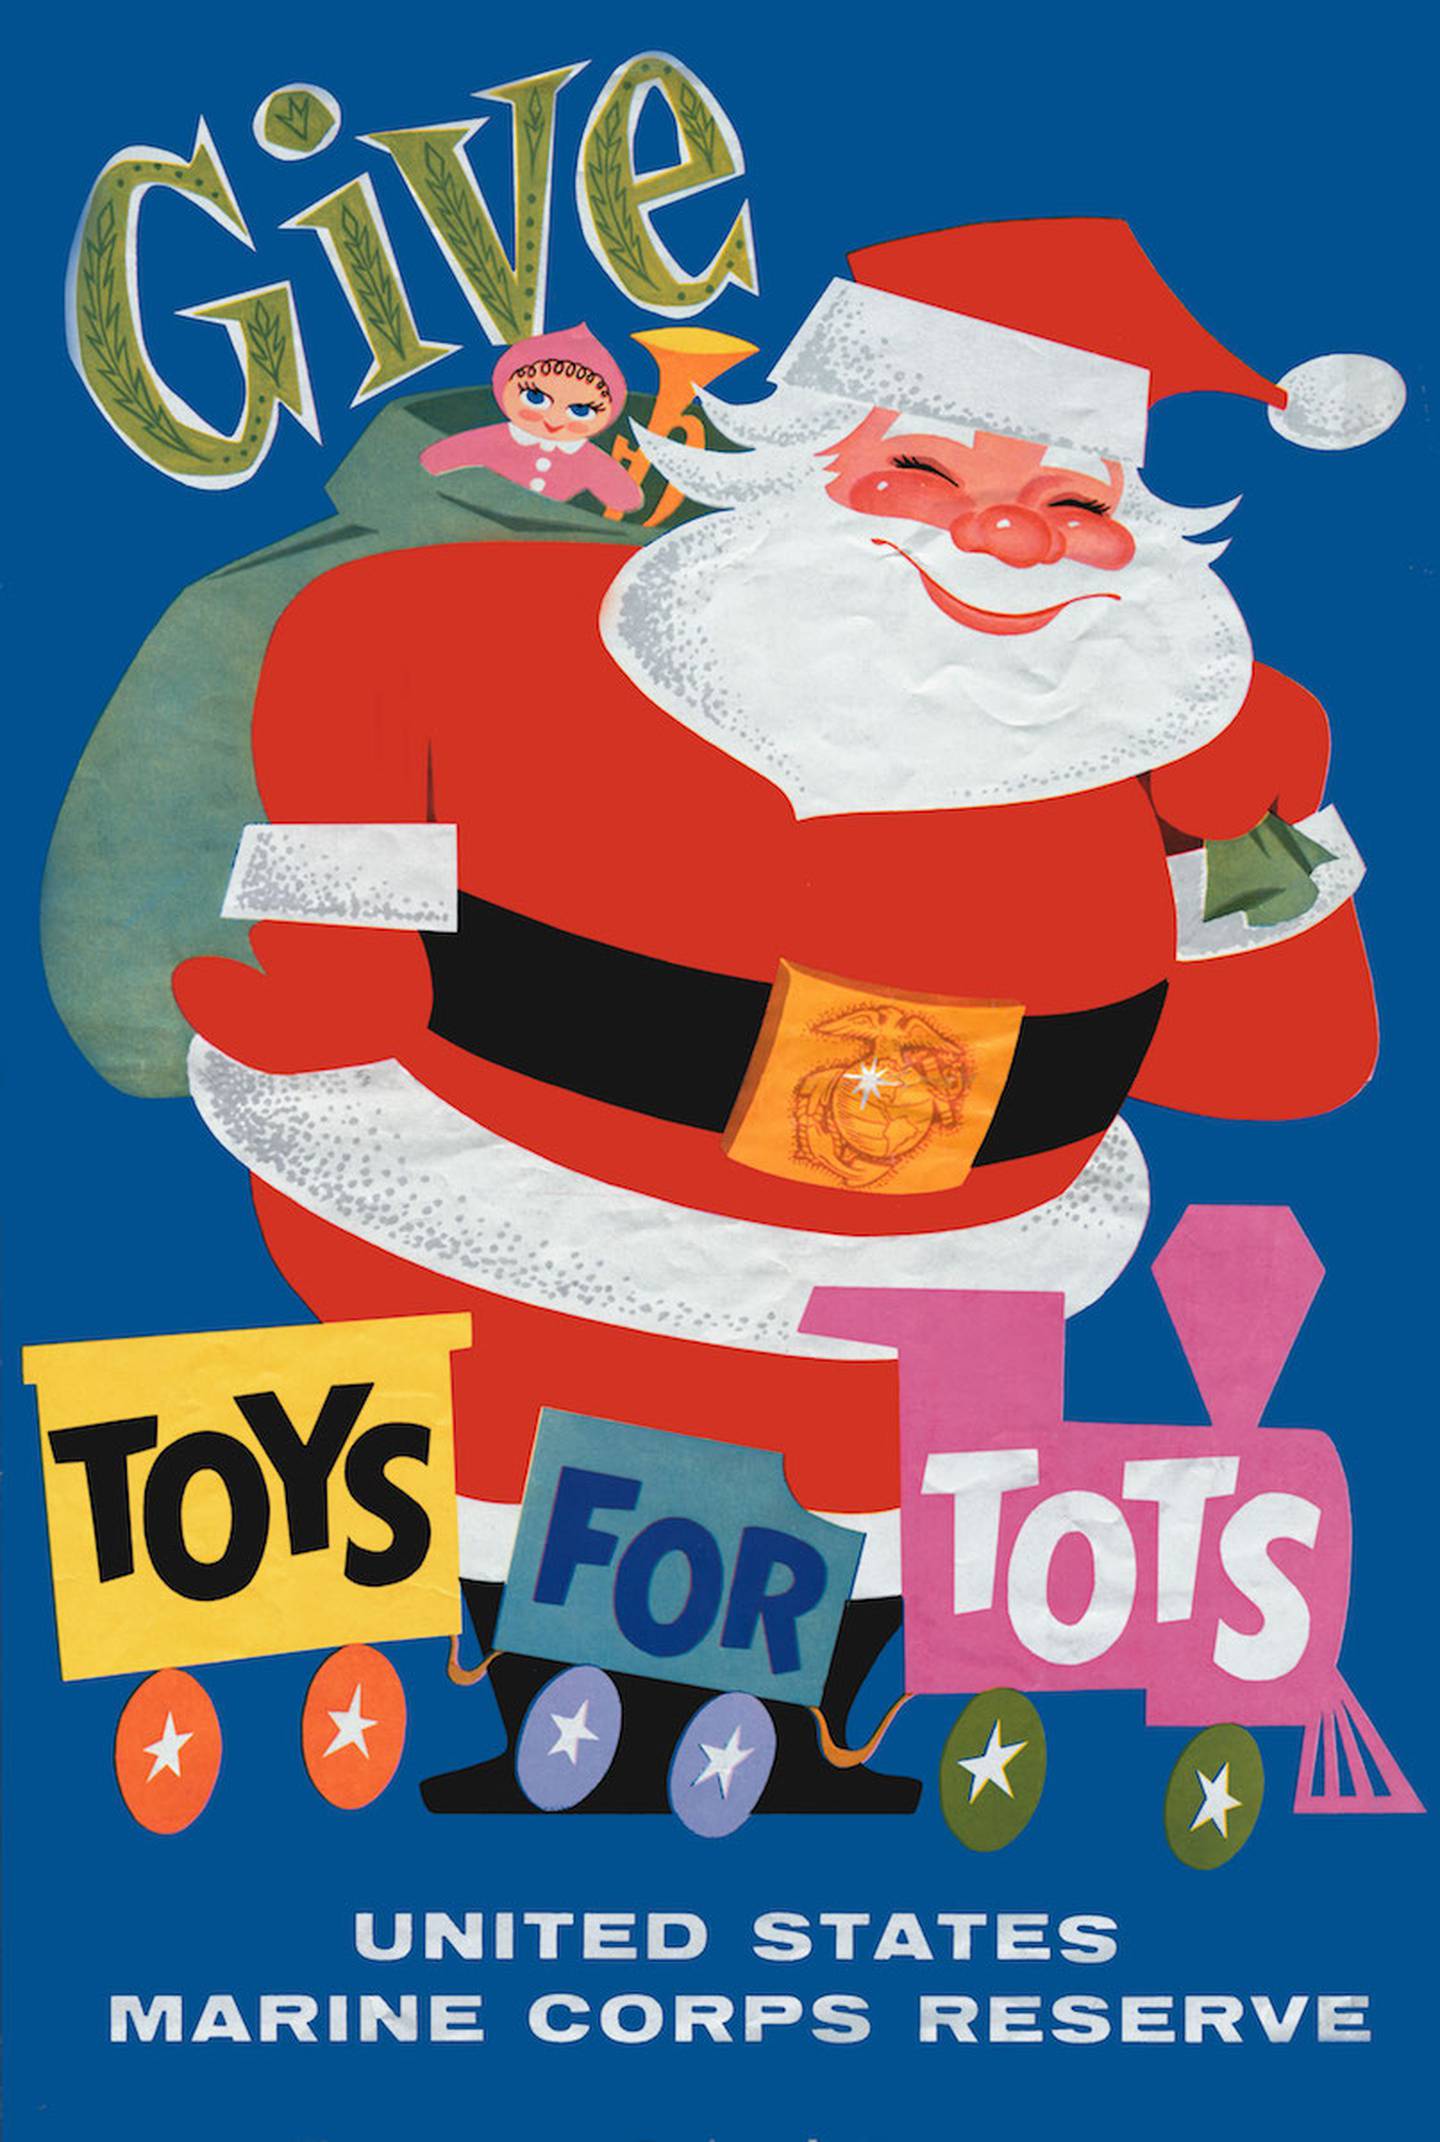 A 1948 artistic poster for Toys for Tots depicts a beaming Santa Claus carrying a sack of toys. In front of him, a toy train bears the words "Toys for Tots" in all caps. It reads "United States Marine Reserve" at the bottom of the poster.